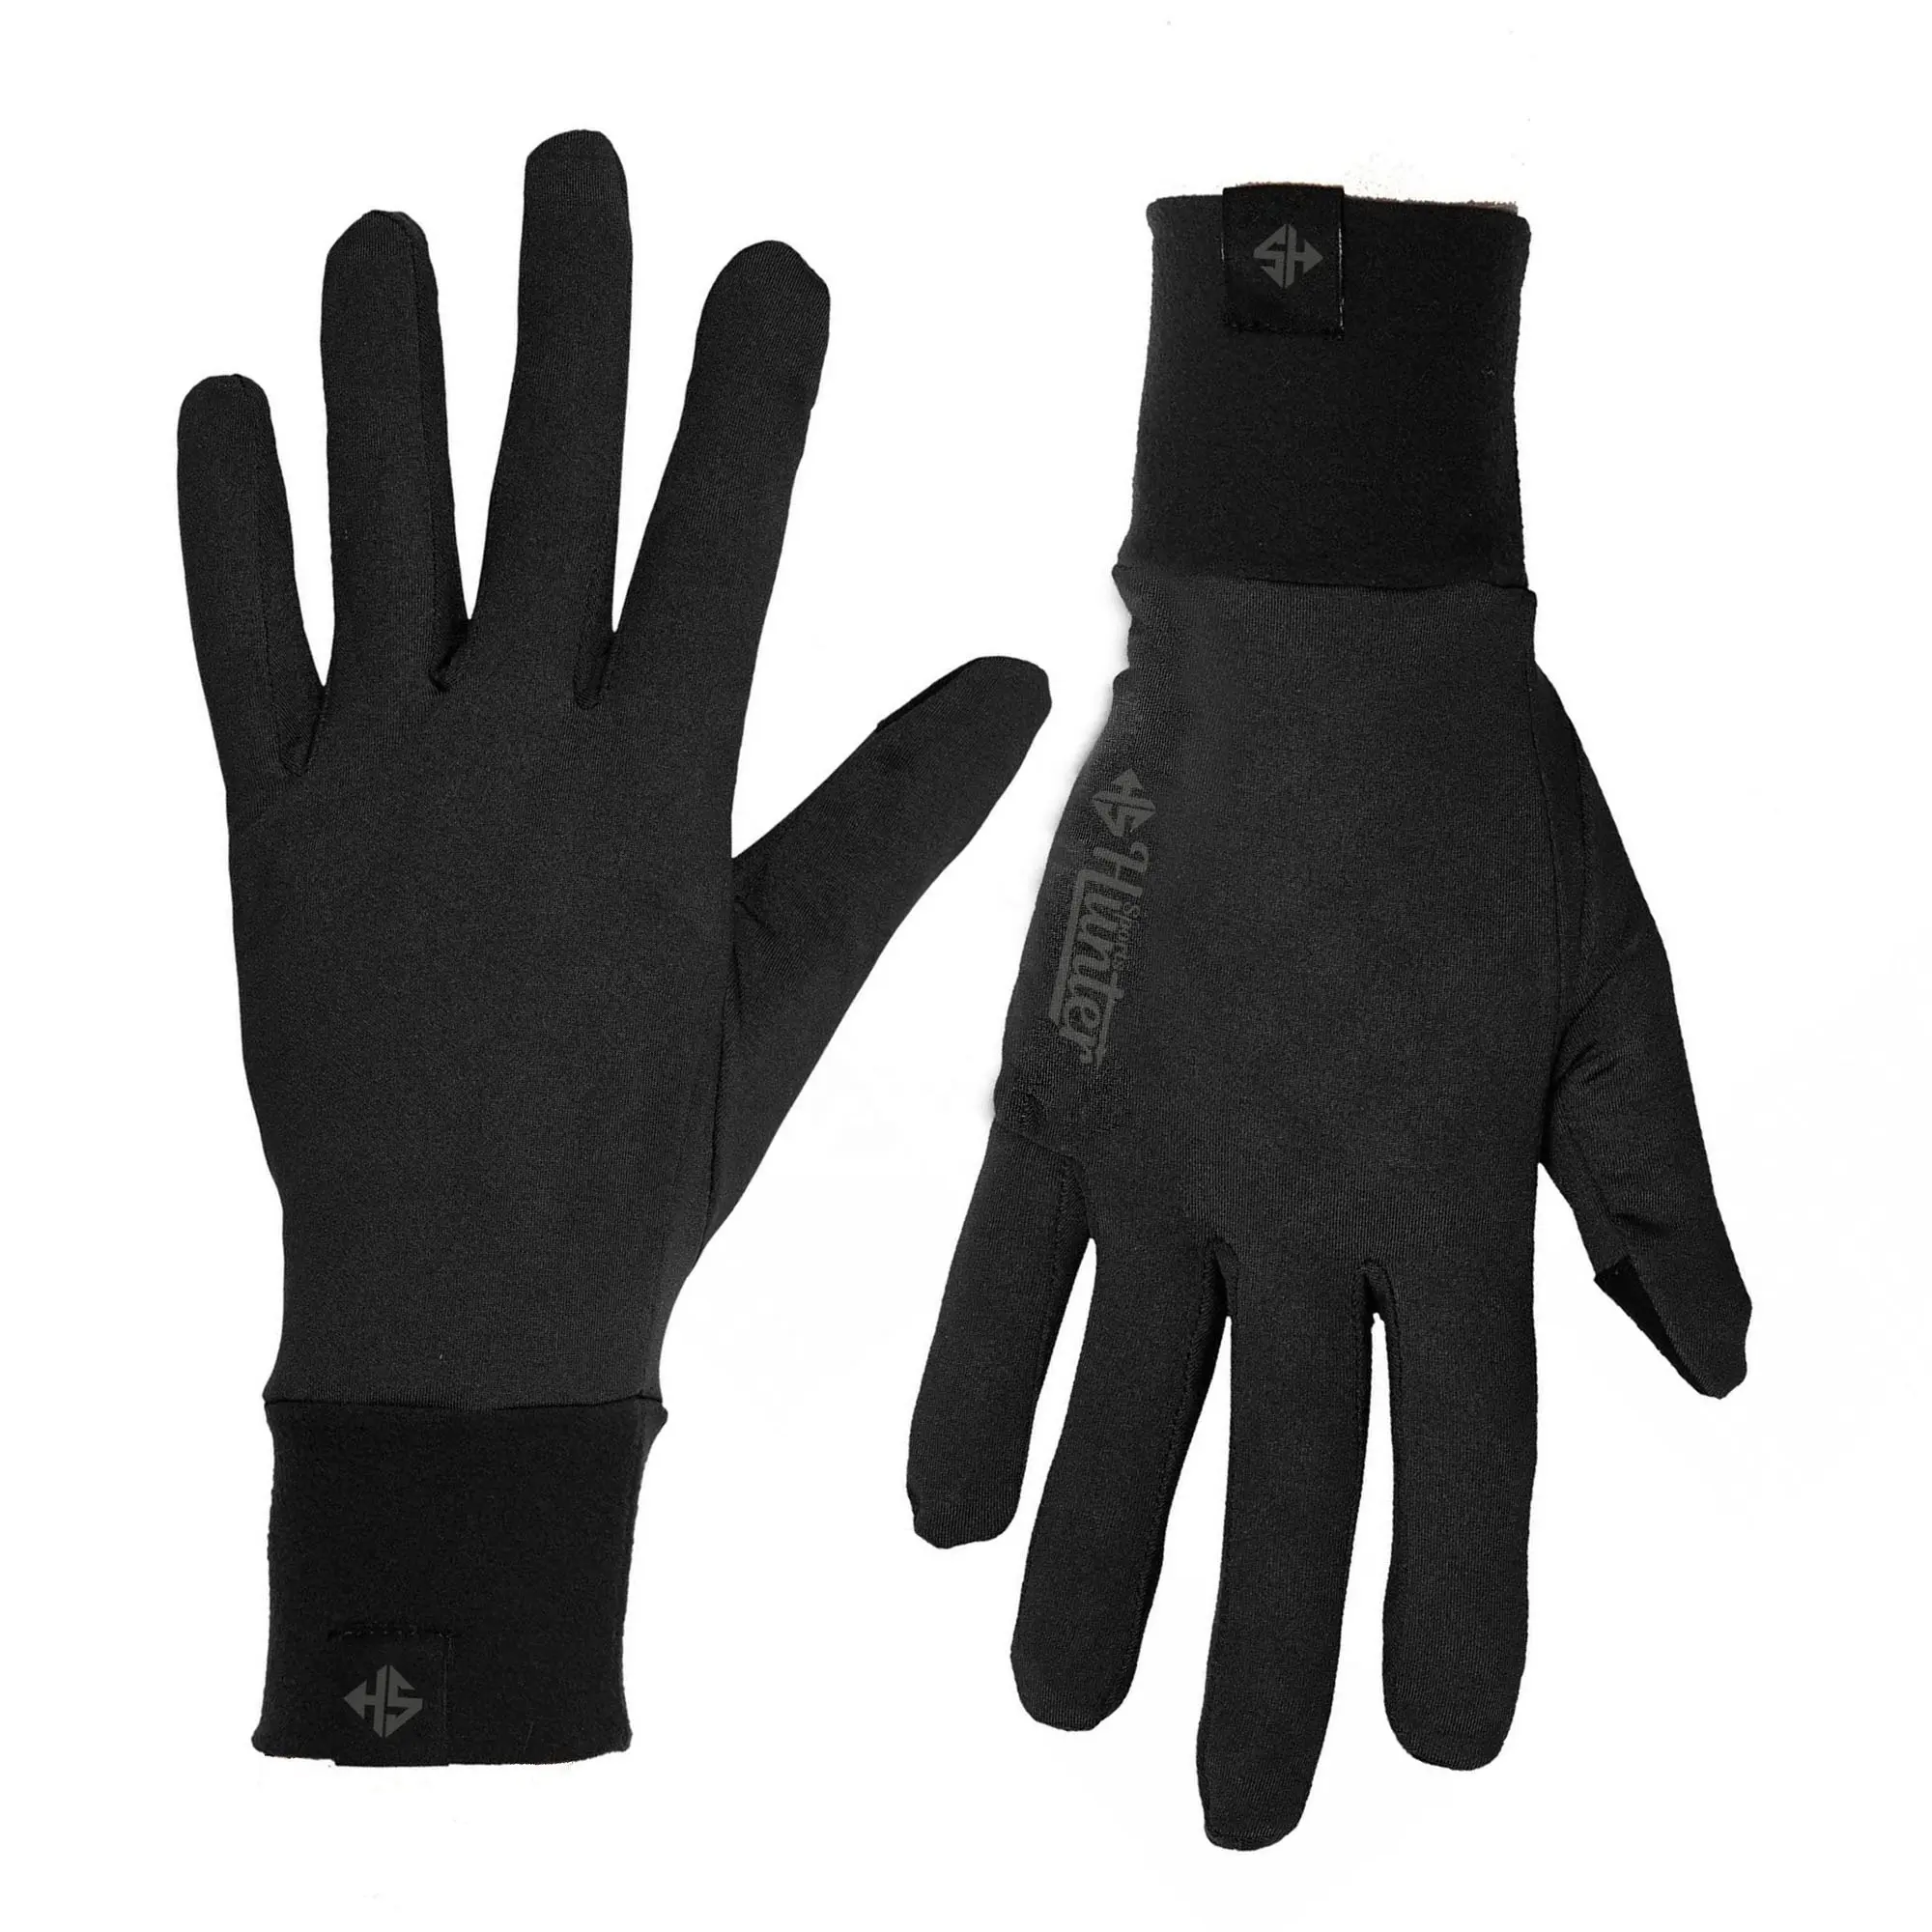 Customize Touchscreen Water Resistant Silicone Gel Palm Fleece Lining Winter Warm Cycling Running Gloves full finger